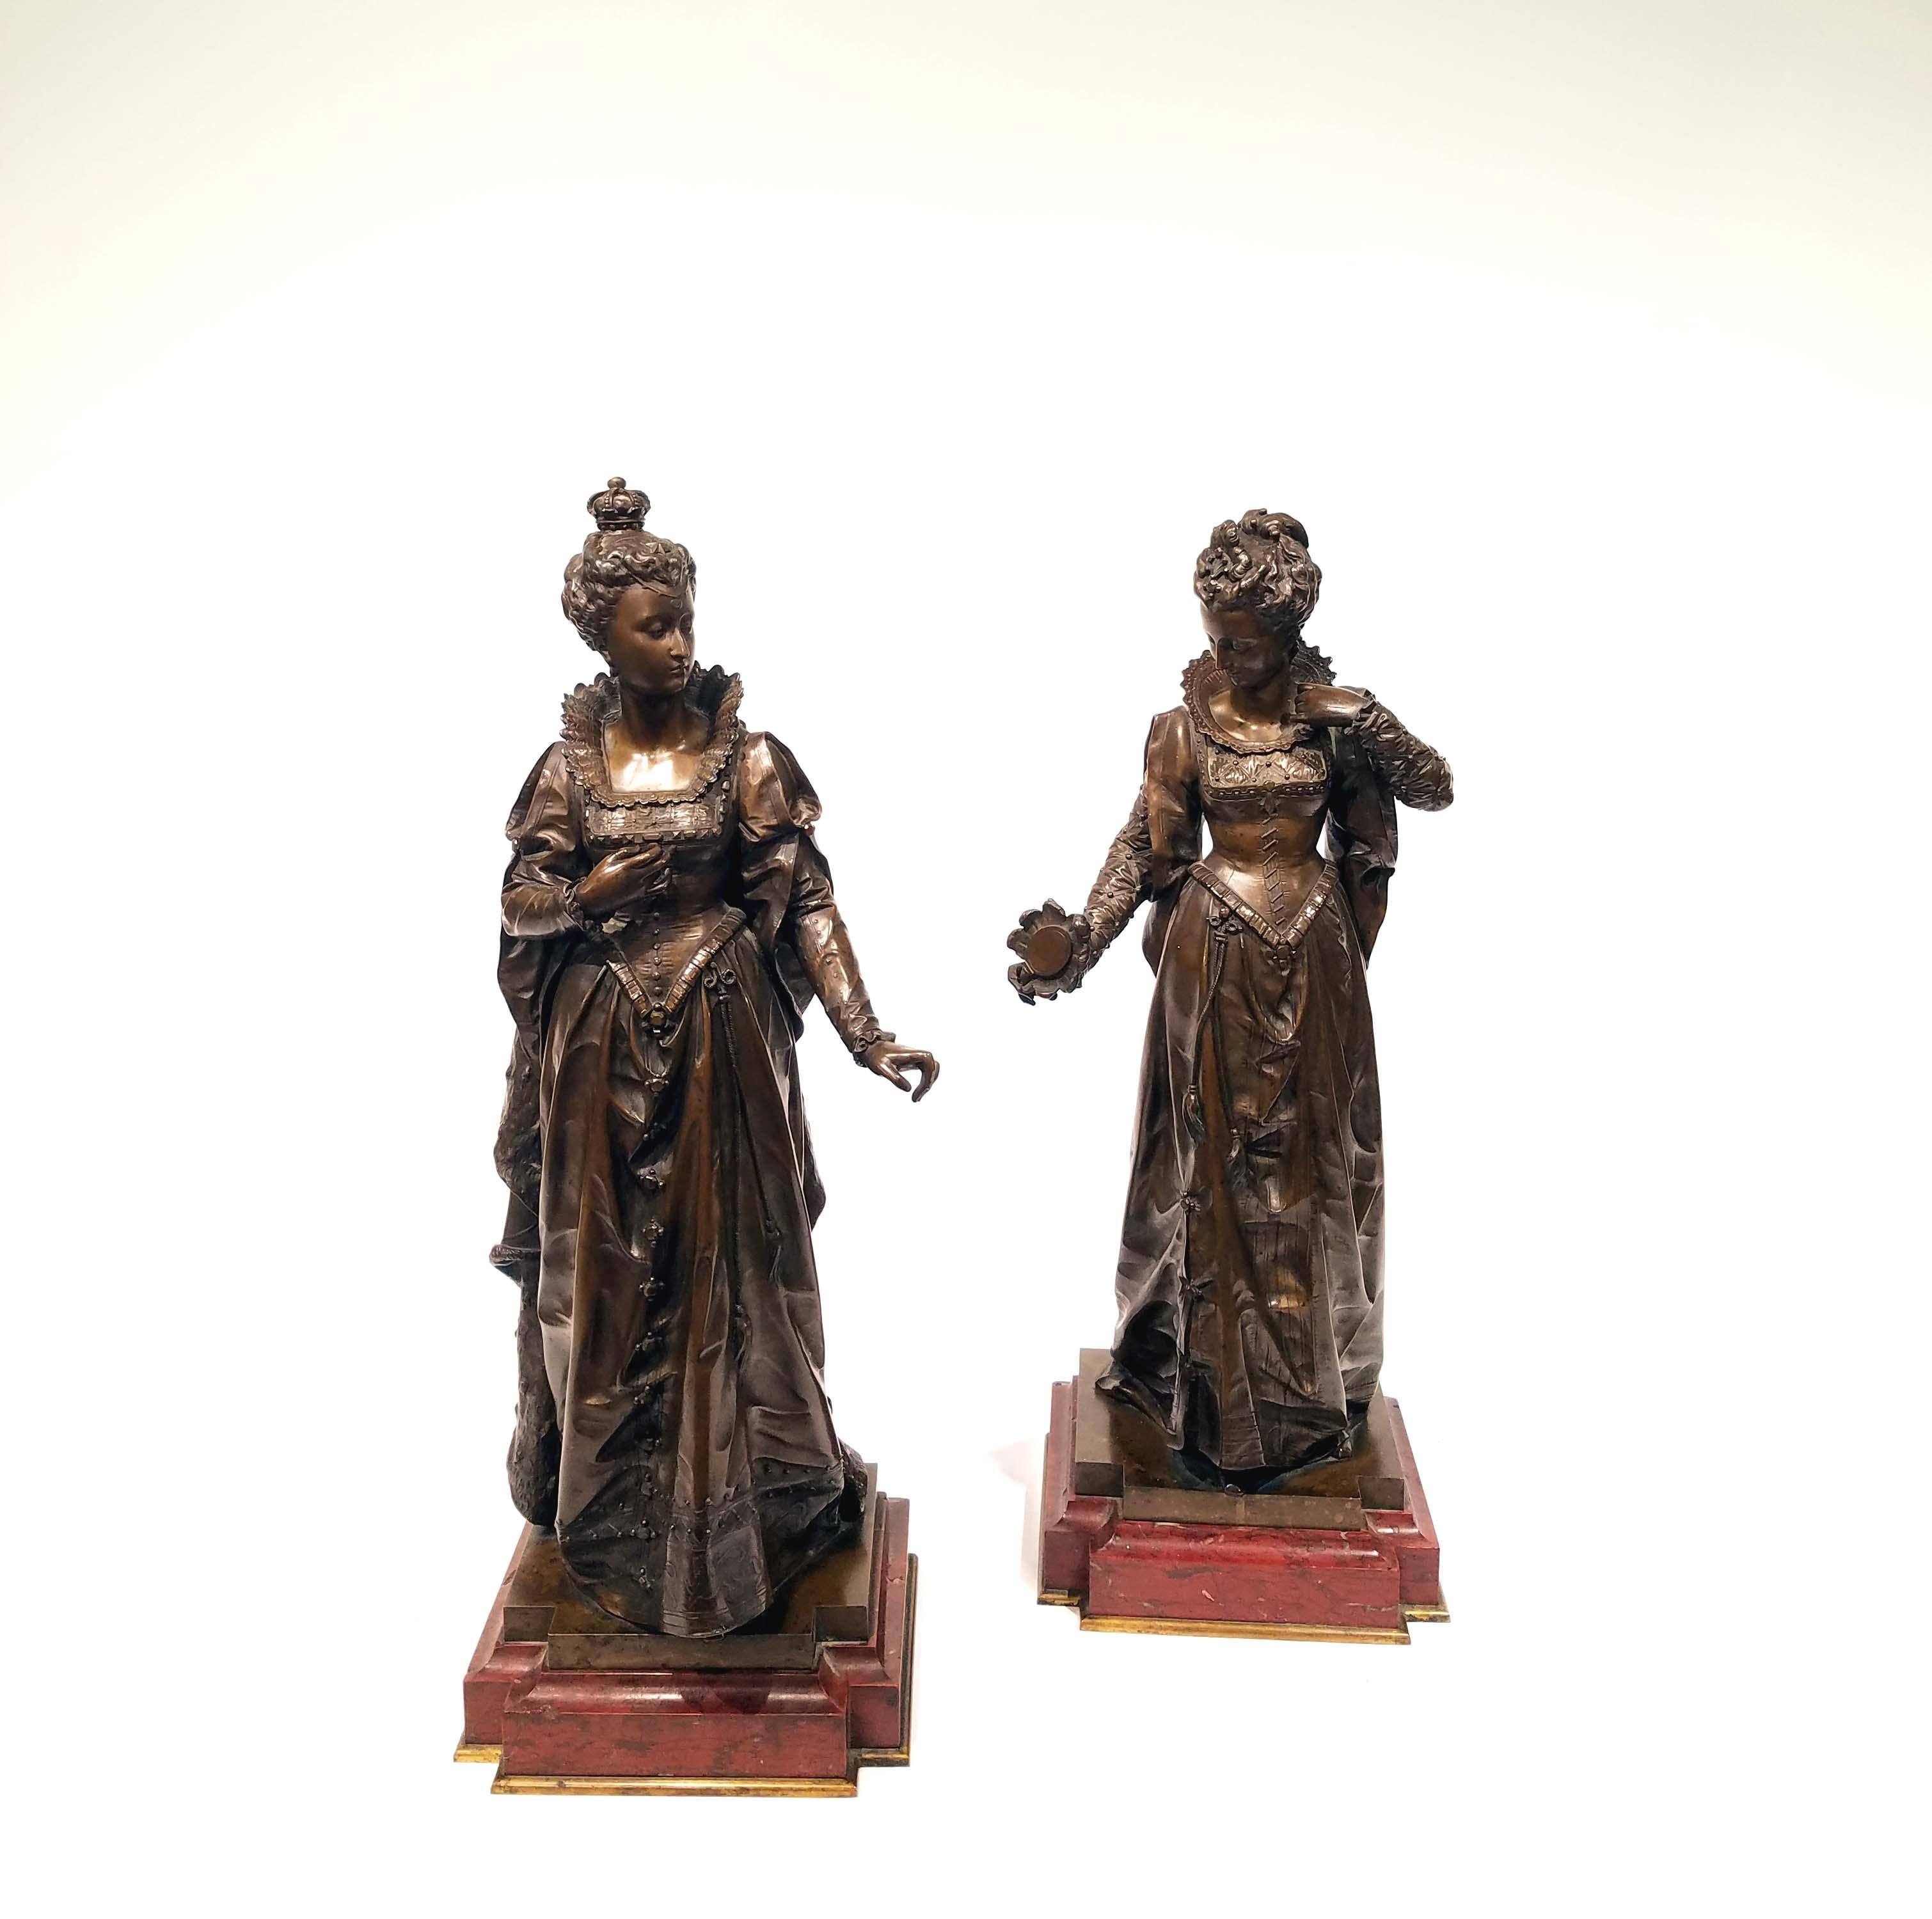 After Eutrope Bouret (French, 1833-1906) Elizabeth I and Mary Queen of Scotts. Patinated bronze on rouge marble base. Signed “Bouret” to the lower left.
Dimensions: 7.0